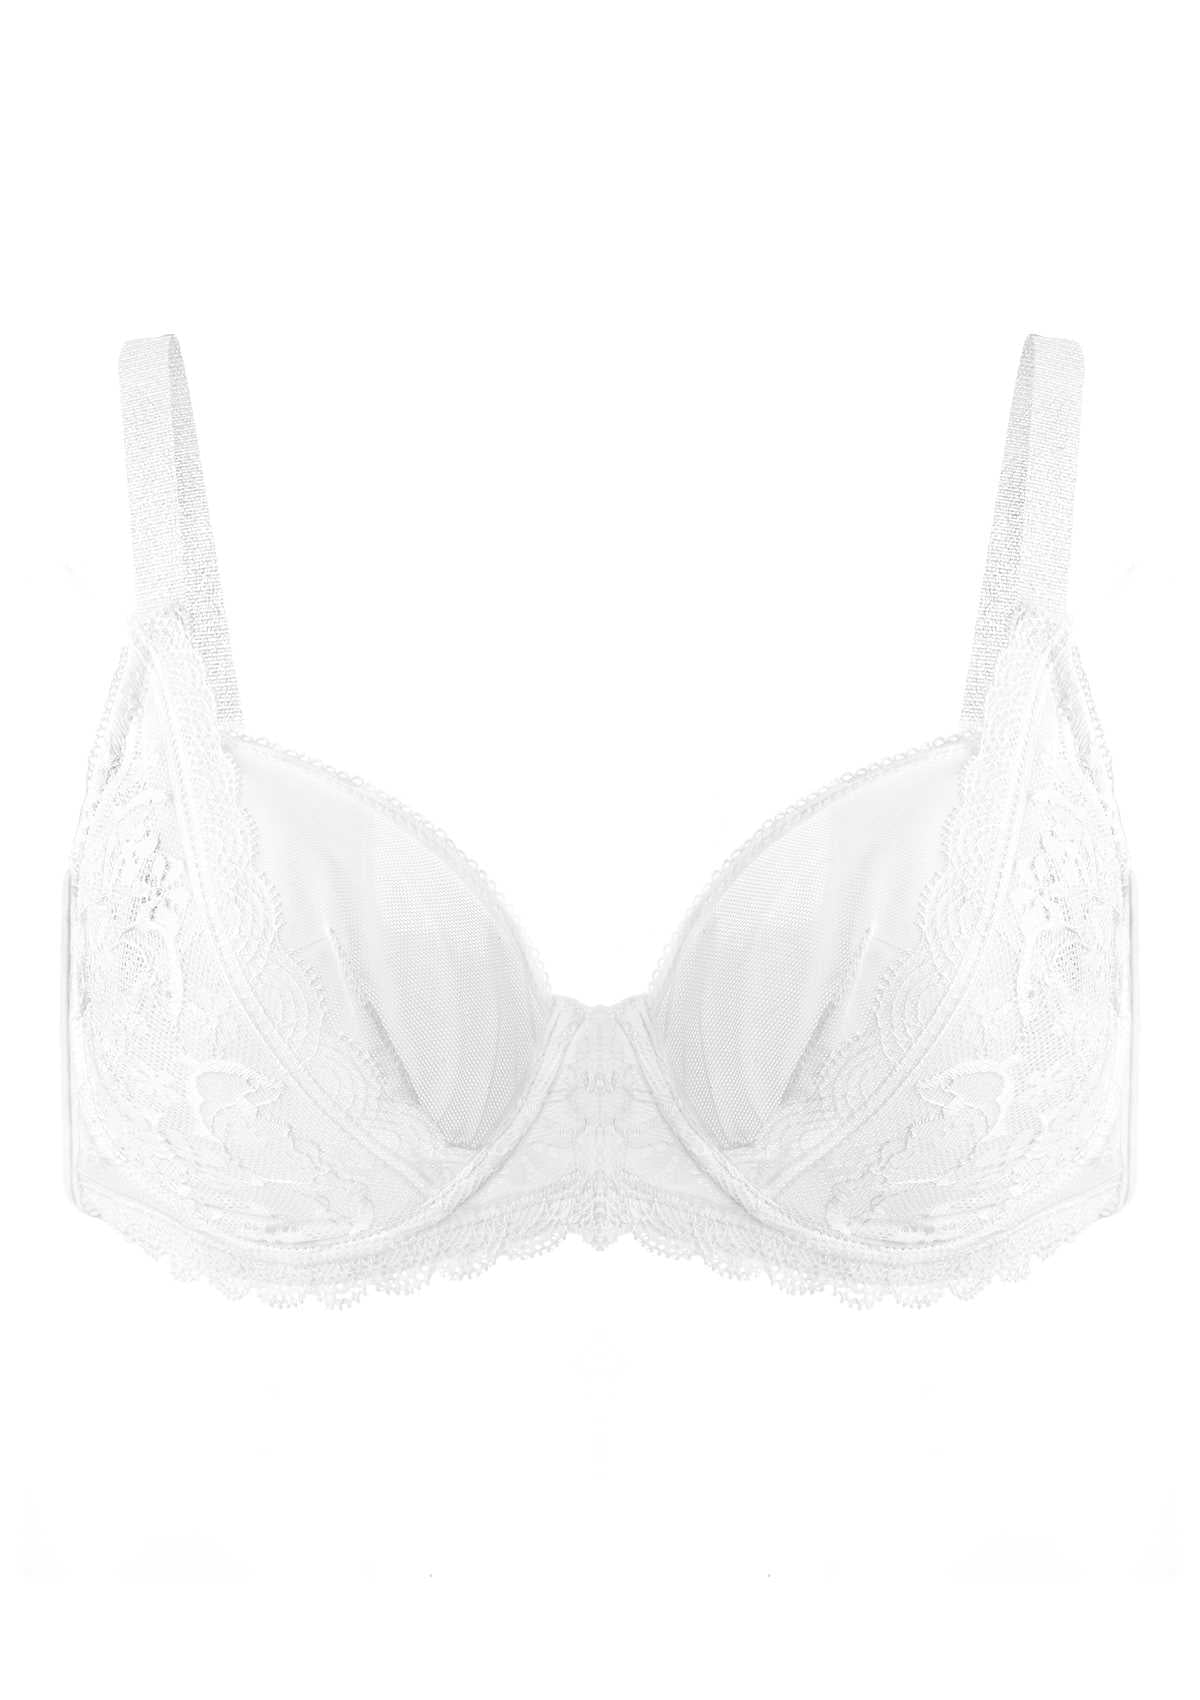 HSIA Anemone Big Bra: Best Bra For Lift And Support, Floral Bra - White / 36 / DDD/F